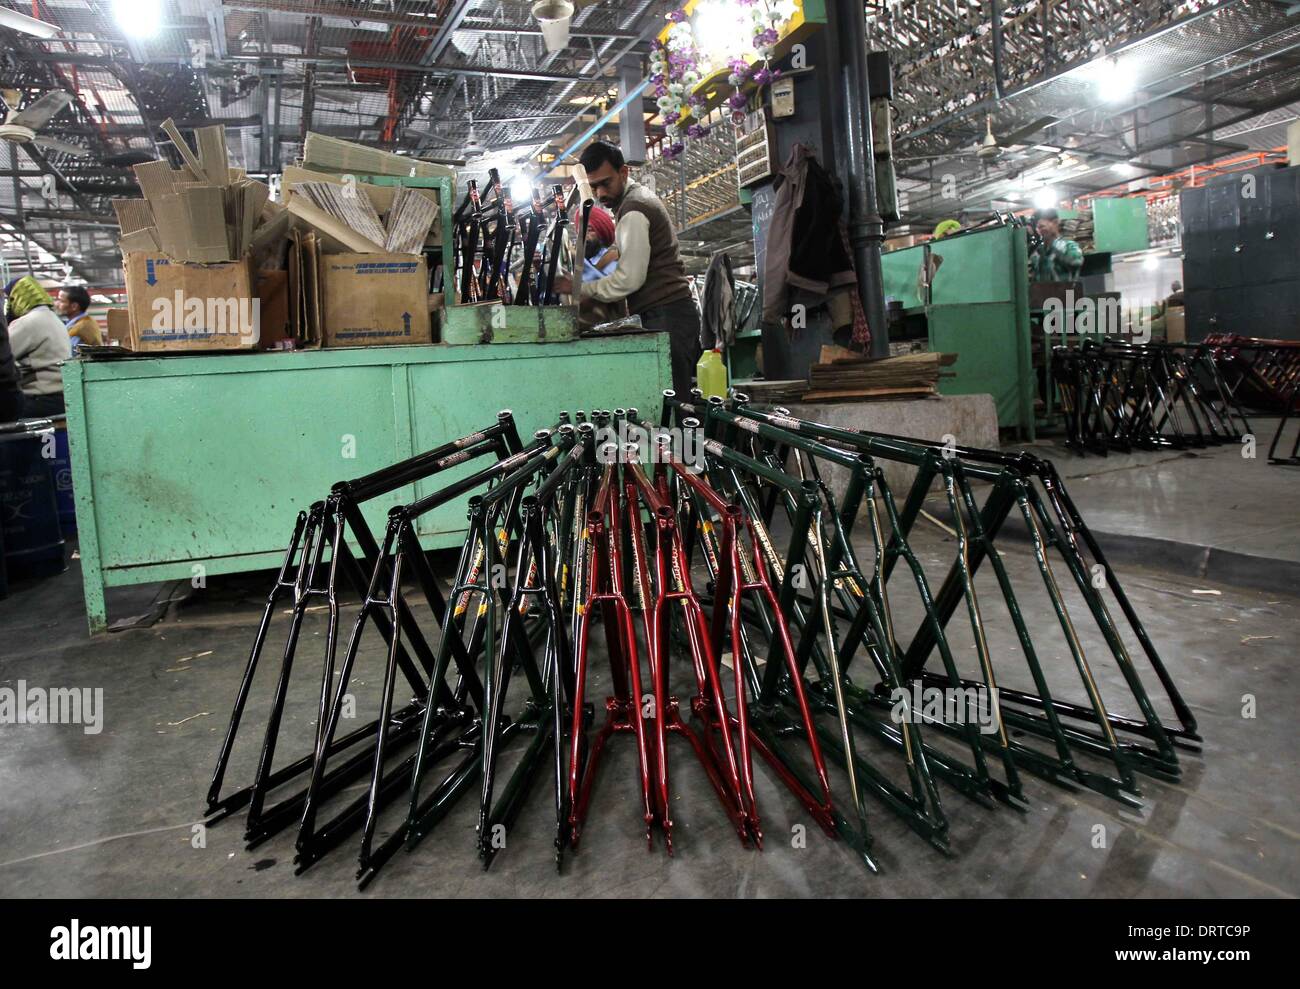 (140201) -- PUNJAB, Feb. 1, 2014 (Xinhua) -- Workers make bicycle parts at a factory at Ludhina in Indian state of Punjab, Feb. 1, 2014. The north Indian state is the hub of bicycle manufacturing. Officials said 40,000-50,000 bicycles are manufactured in the city everyday and exported to Indian states and other countries. The state has around 4000 registered small and large units associated with making bicycle parts. (Xinhua/Javed Dar) Stock Photo